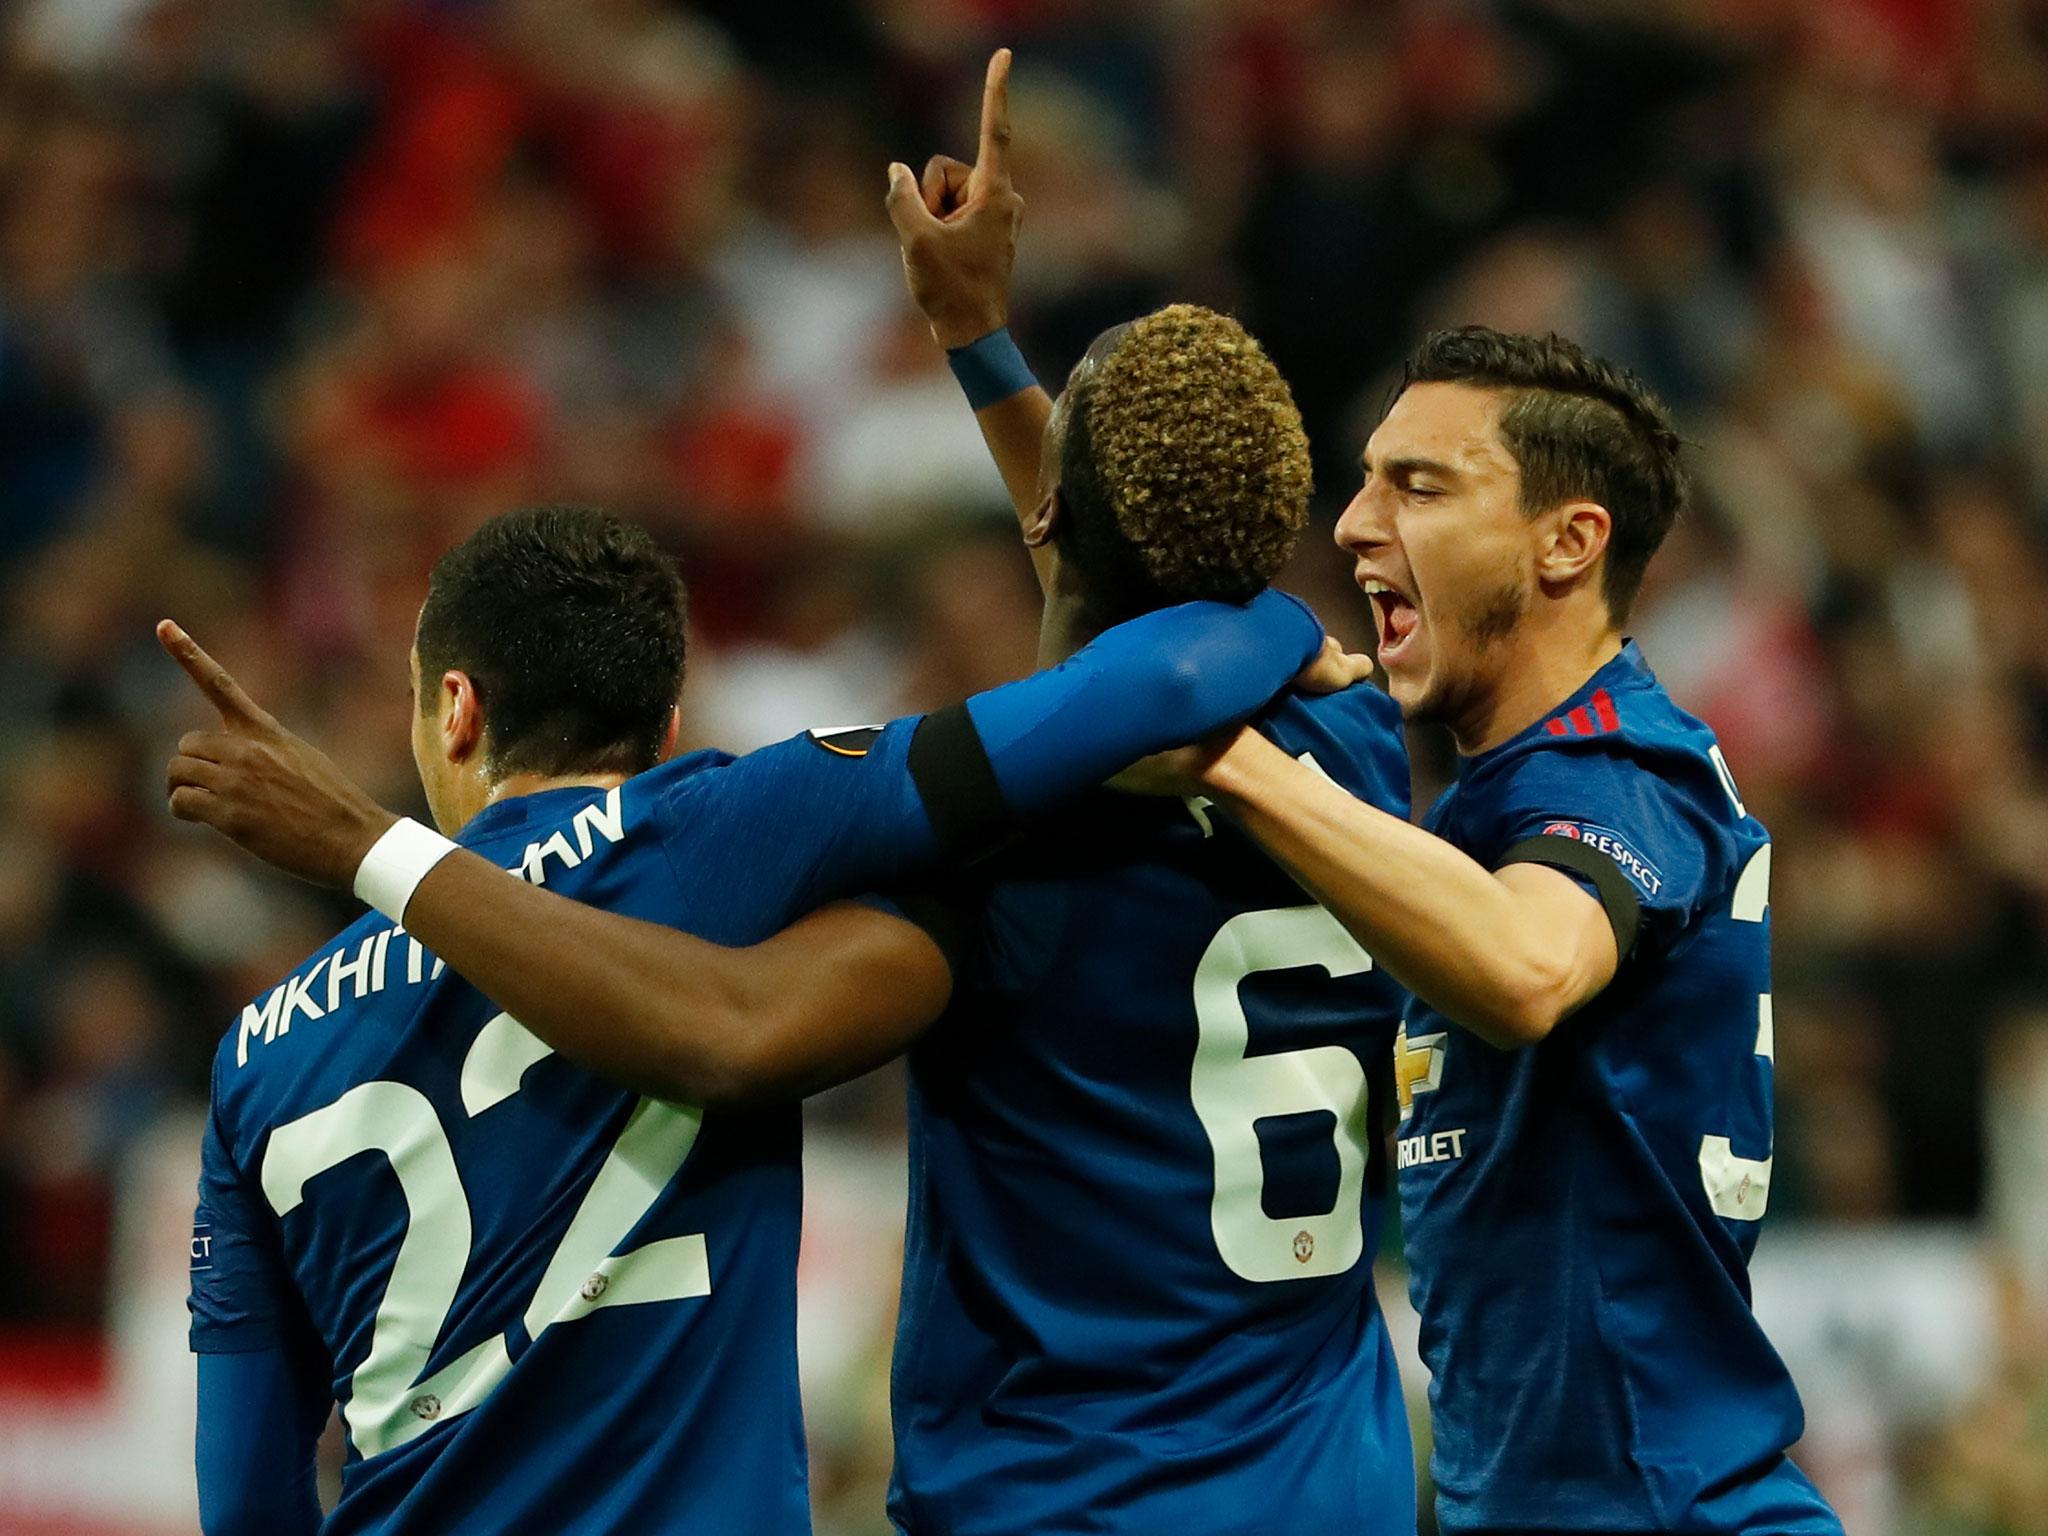 Paul Pogba led Manchester United to victory on an emotional night in Stockholm